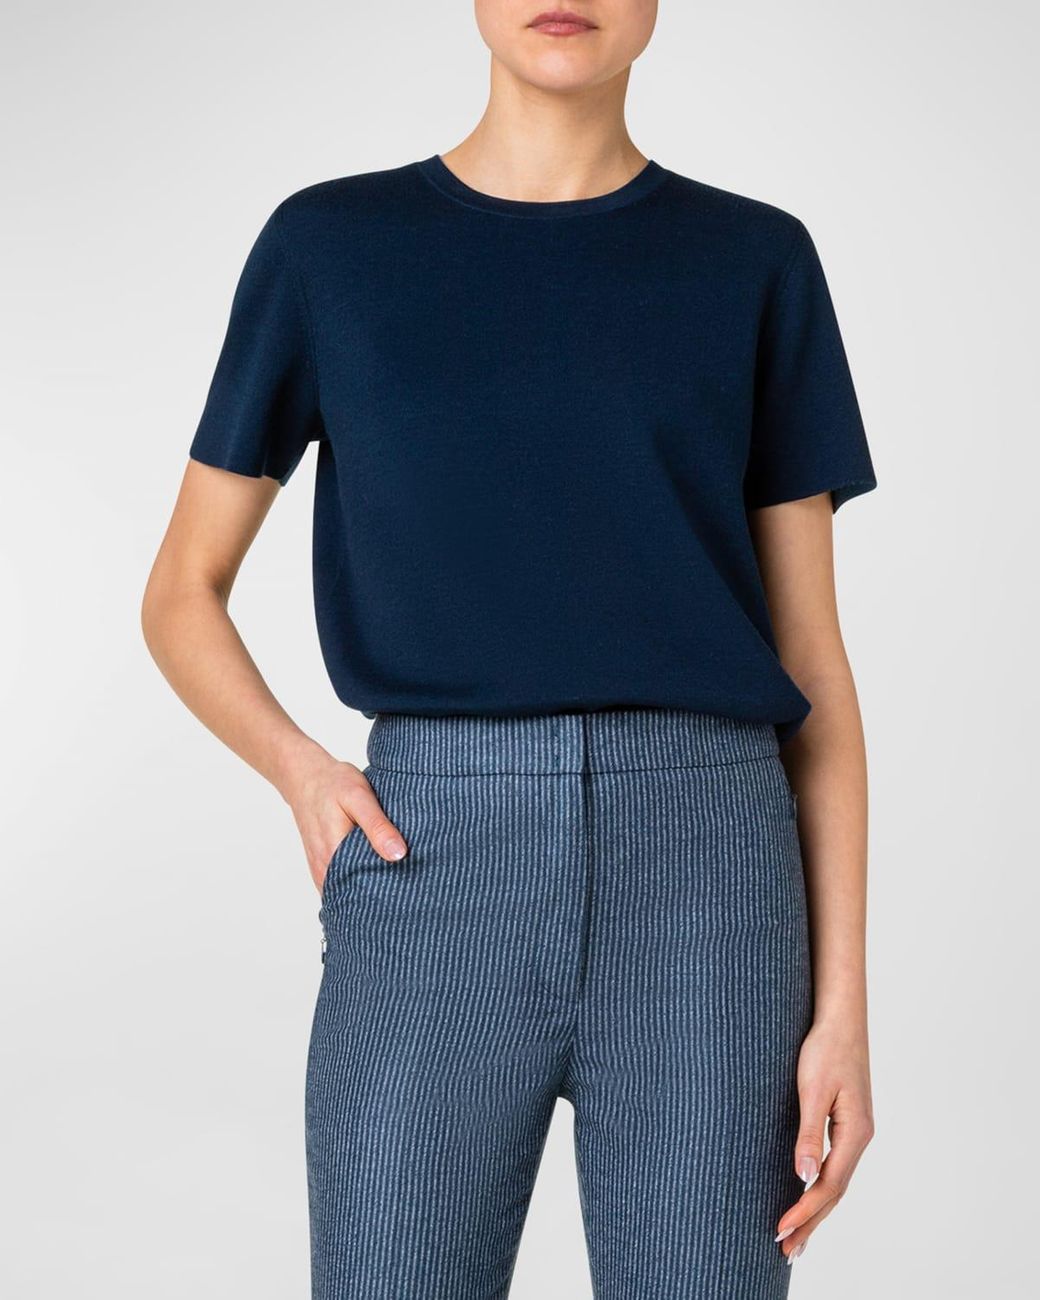 Akris Bi-color Reversible Knit Wool Pullover Shirt in Blue | Lyst